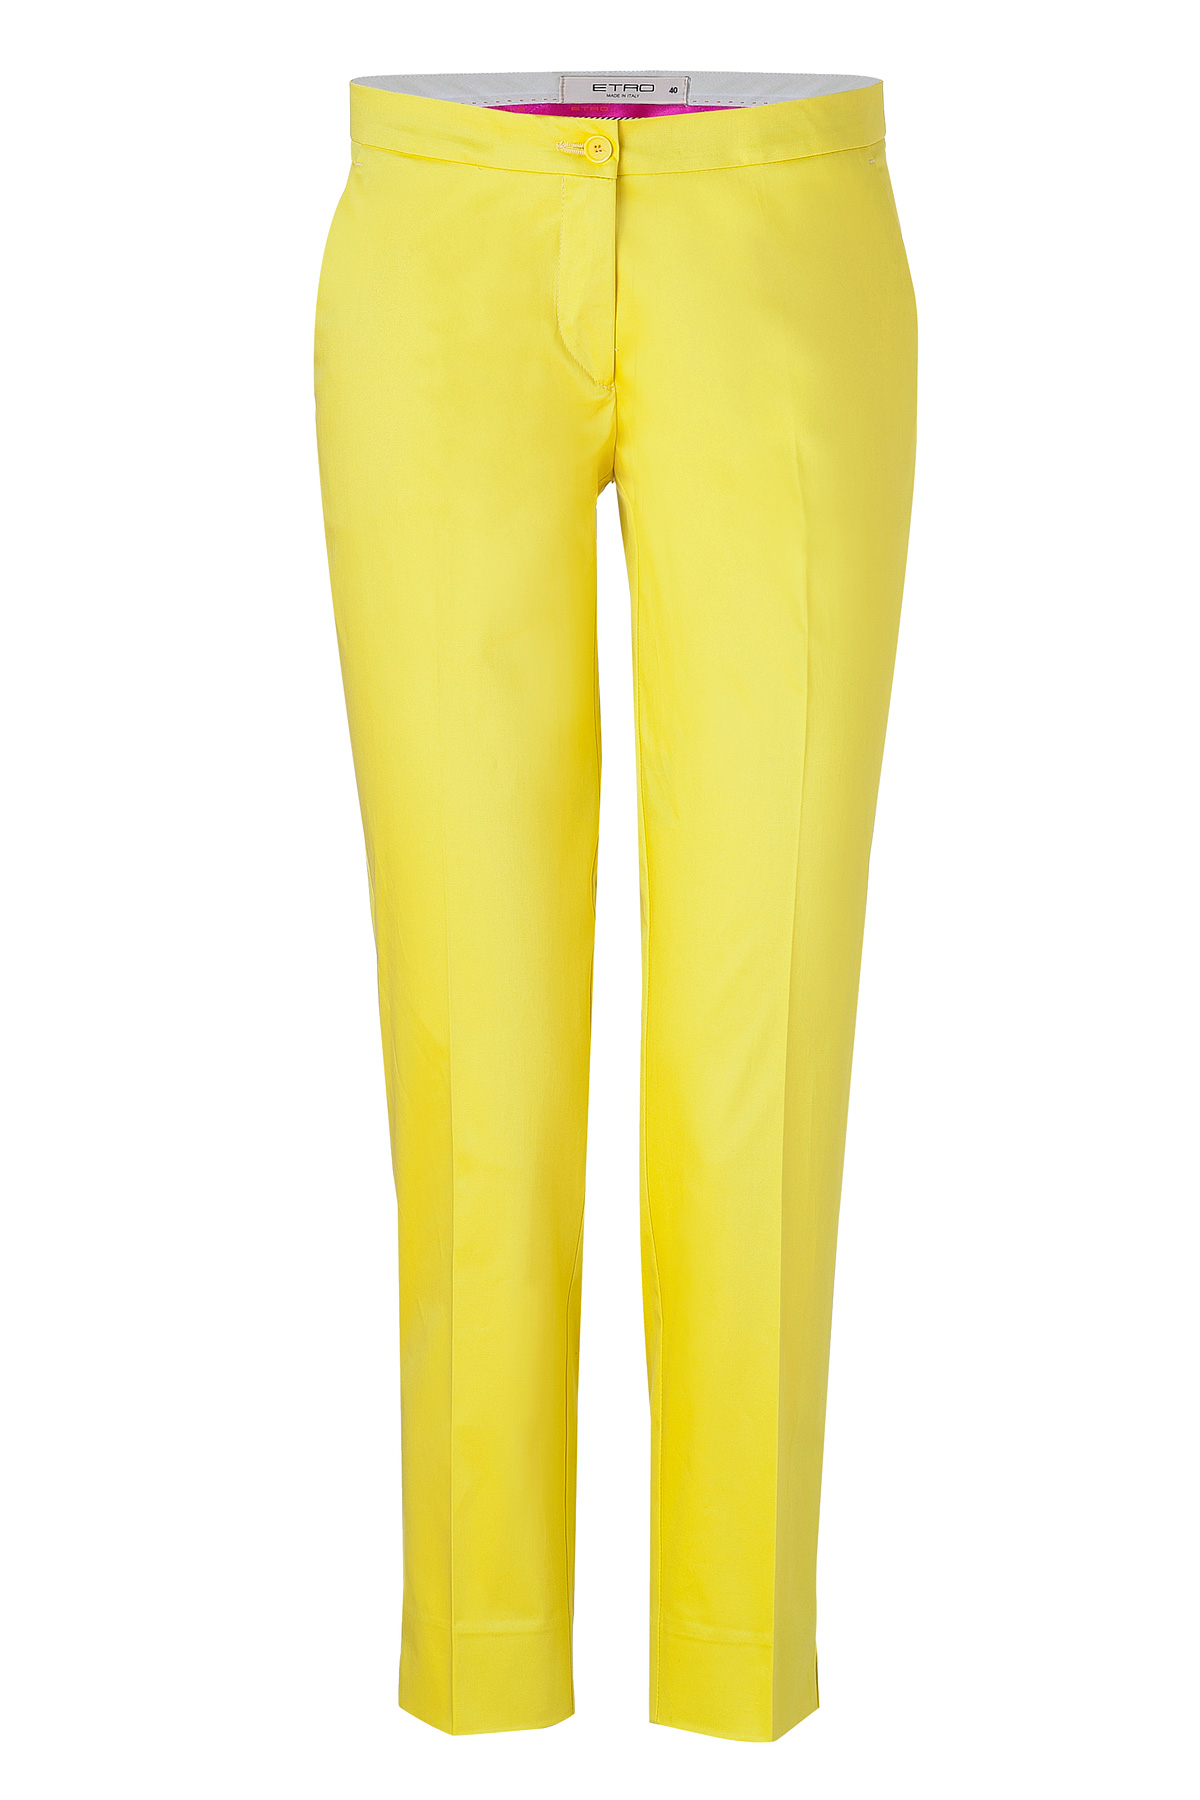 Lyst - Etro Grapefruit Yellow Cotton Stretch Ankle Pants in Yellow